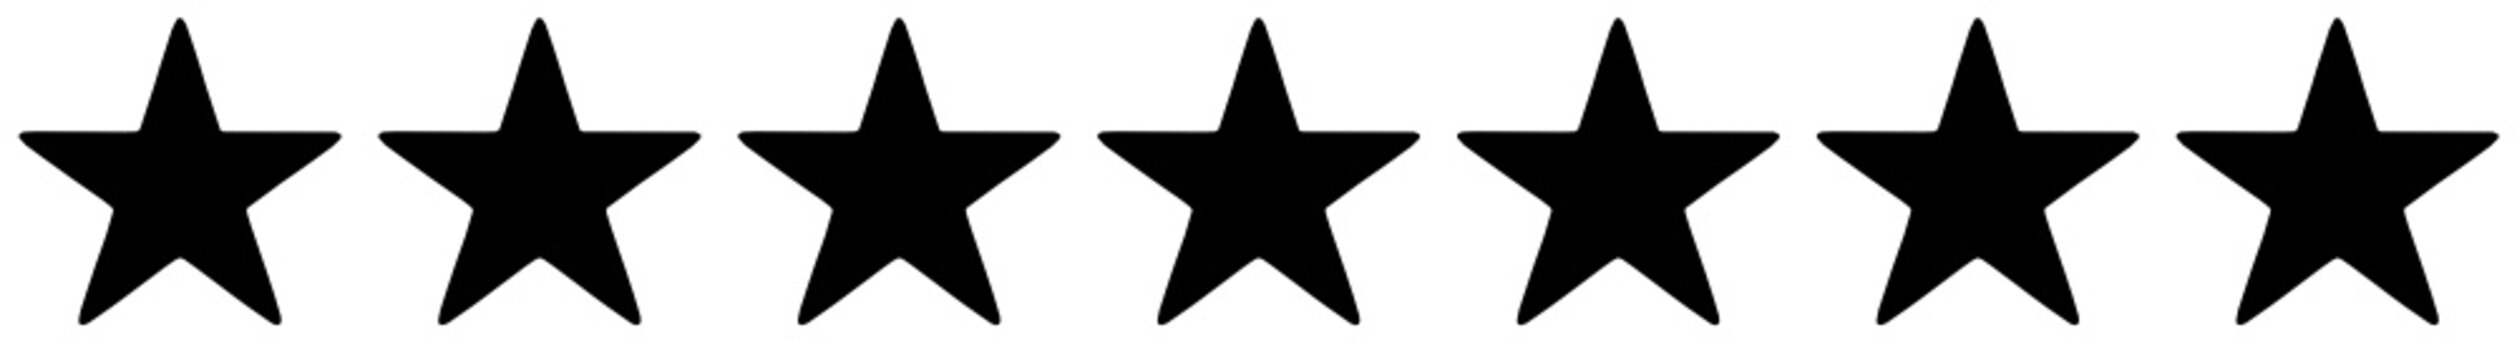  Row of seven black stars on a white